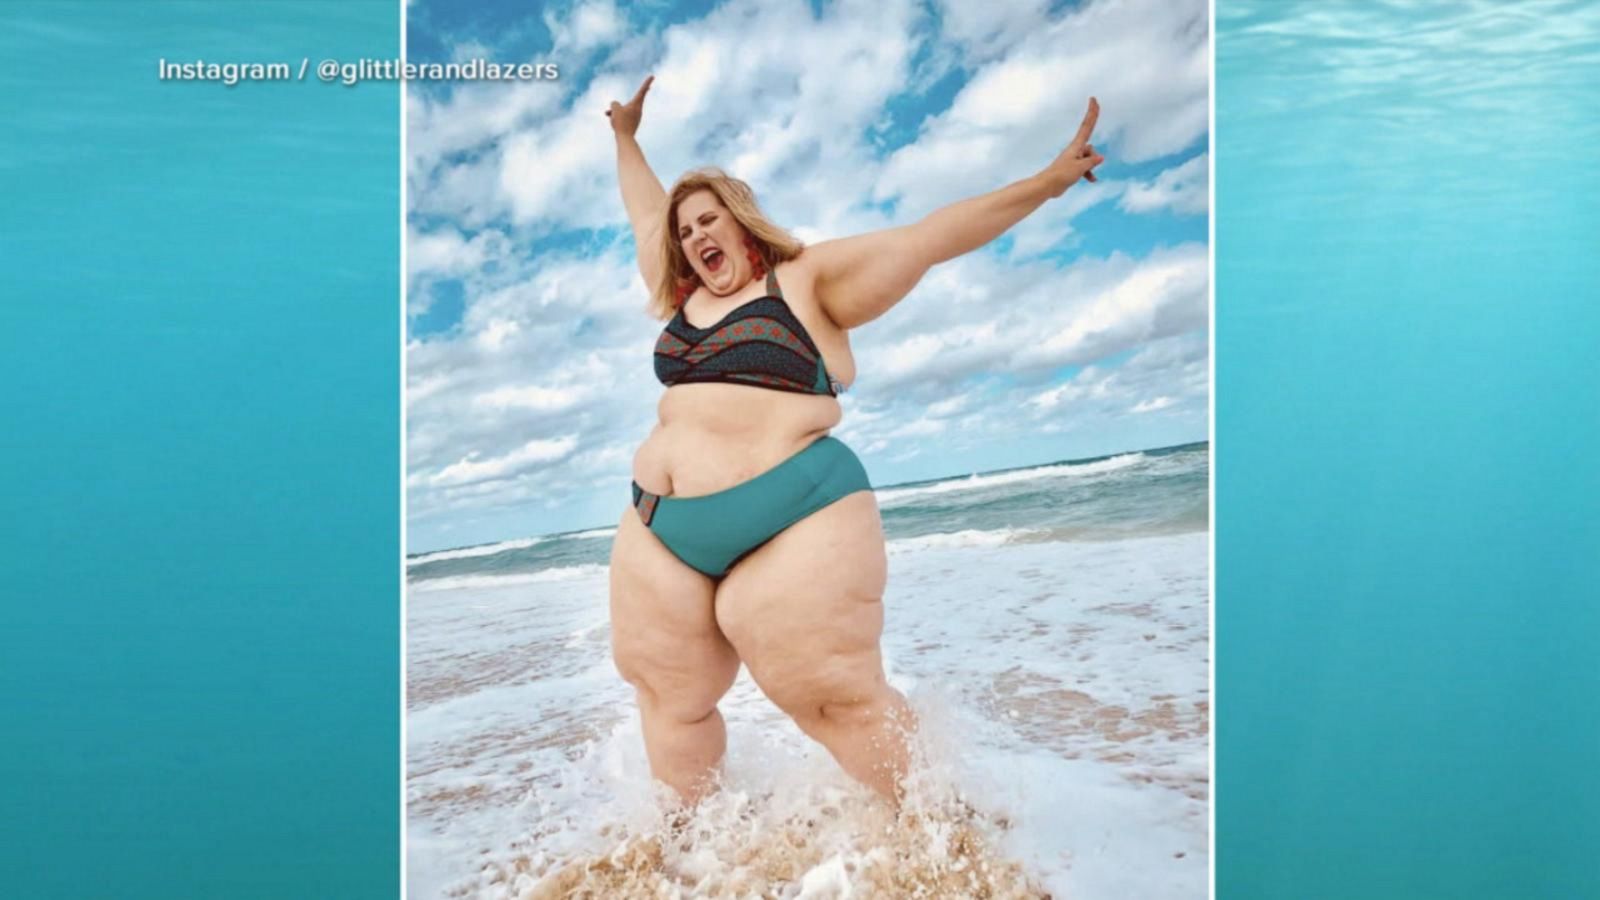 Gillette posted a photo of a plus-size model and Twitter couldn't handle it  - ABC News